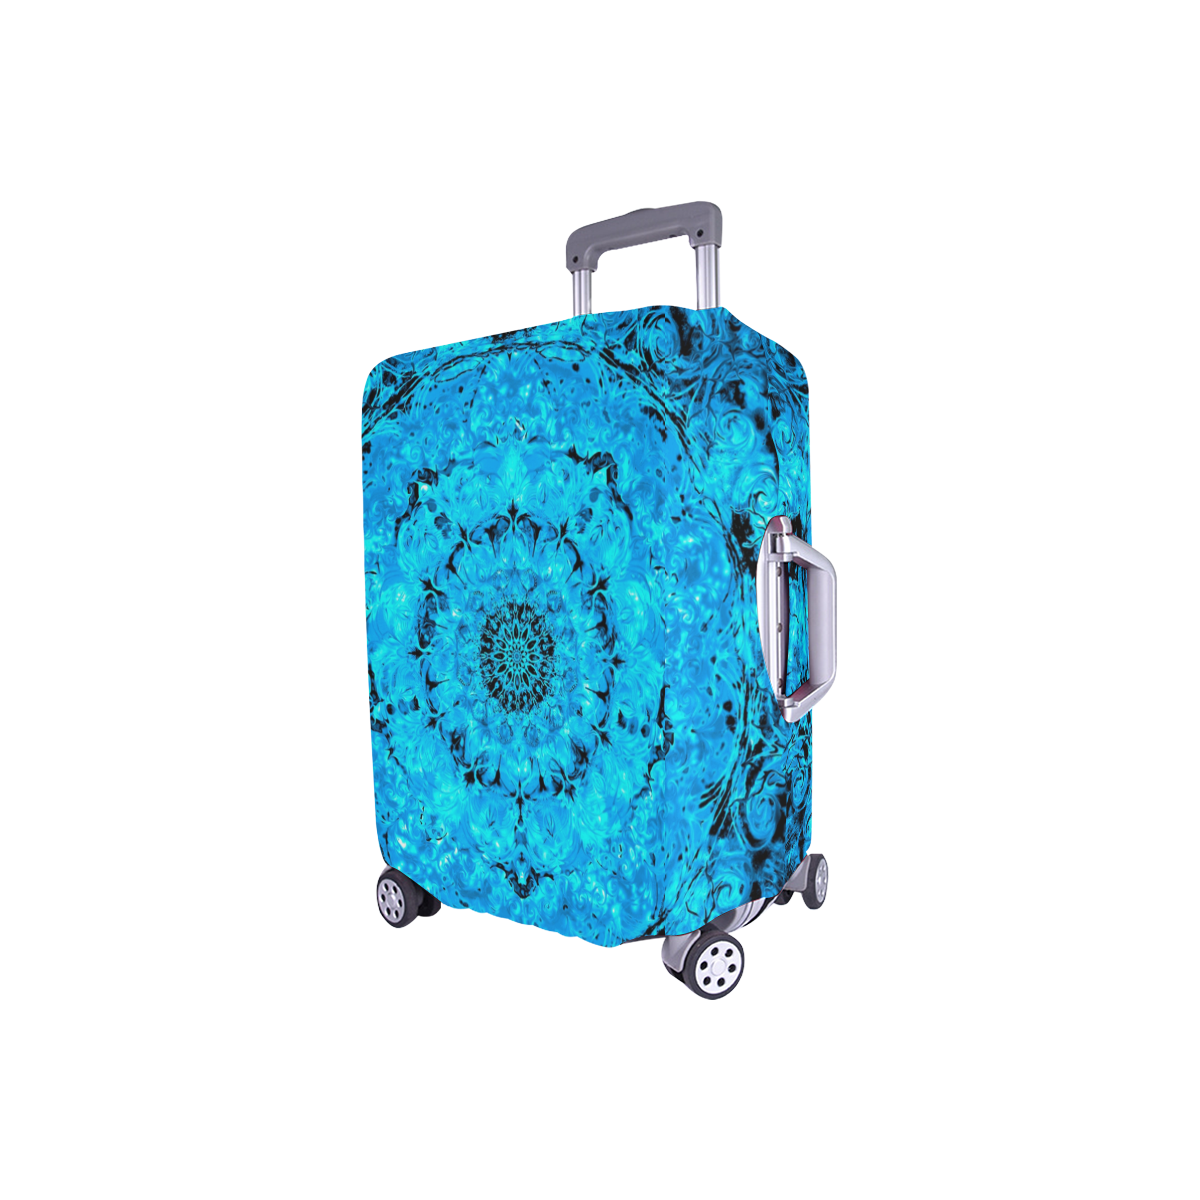 light and water 2-20 Luggage Cover/Small 18"-21"